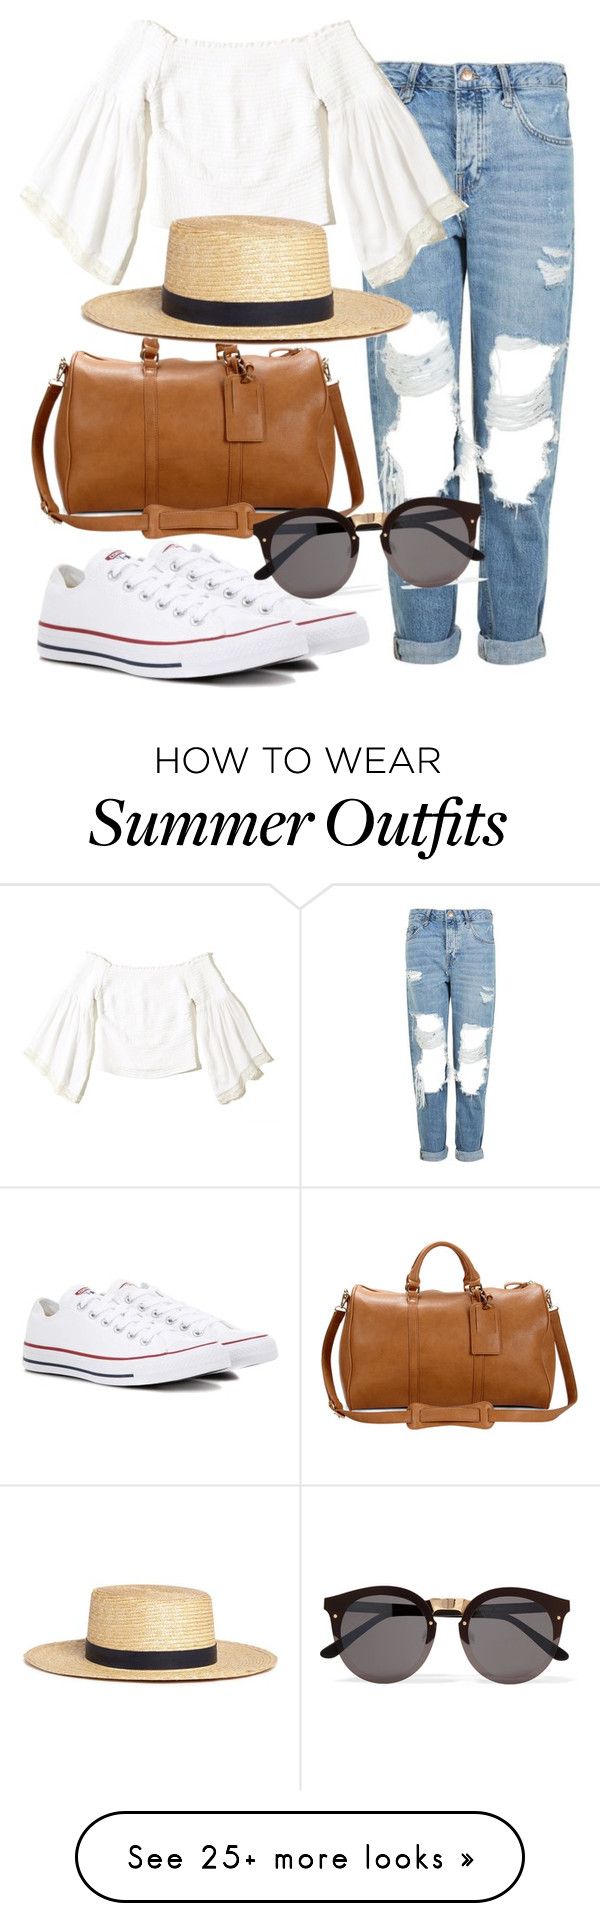 "Denim Outfit" by urban-cocoabutter on Polyvore featuring Topshop, Con...